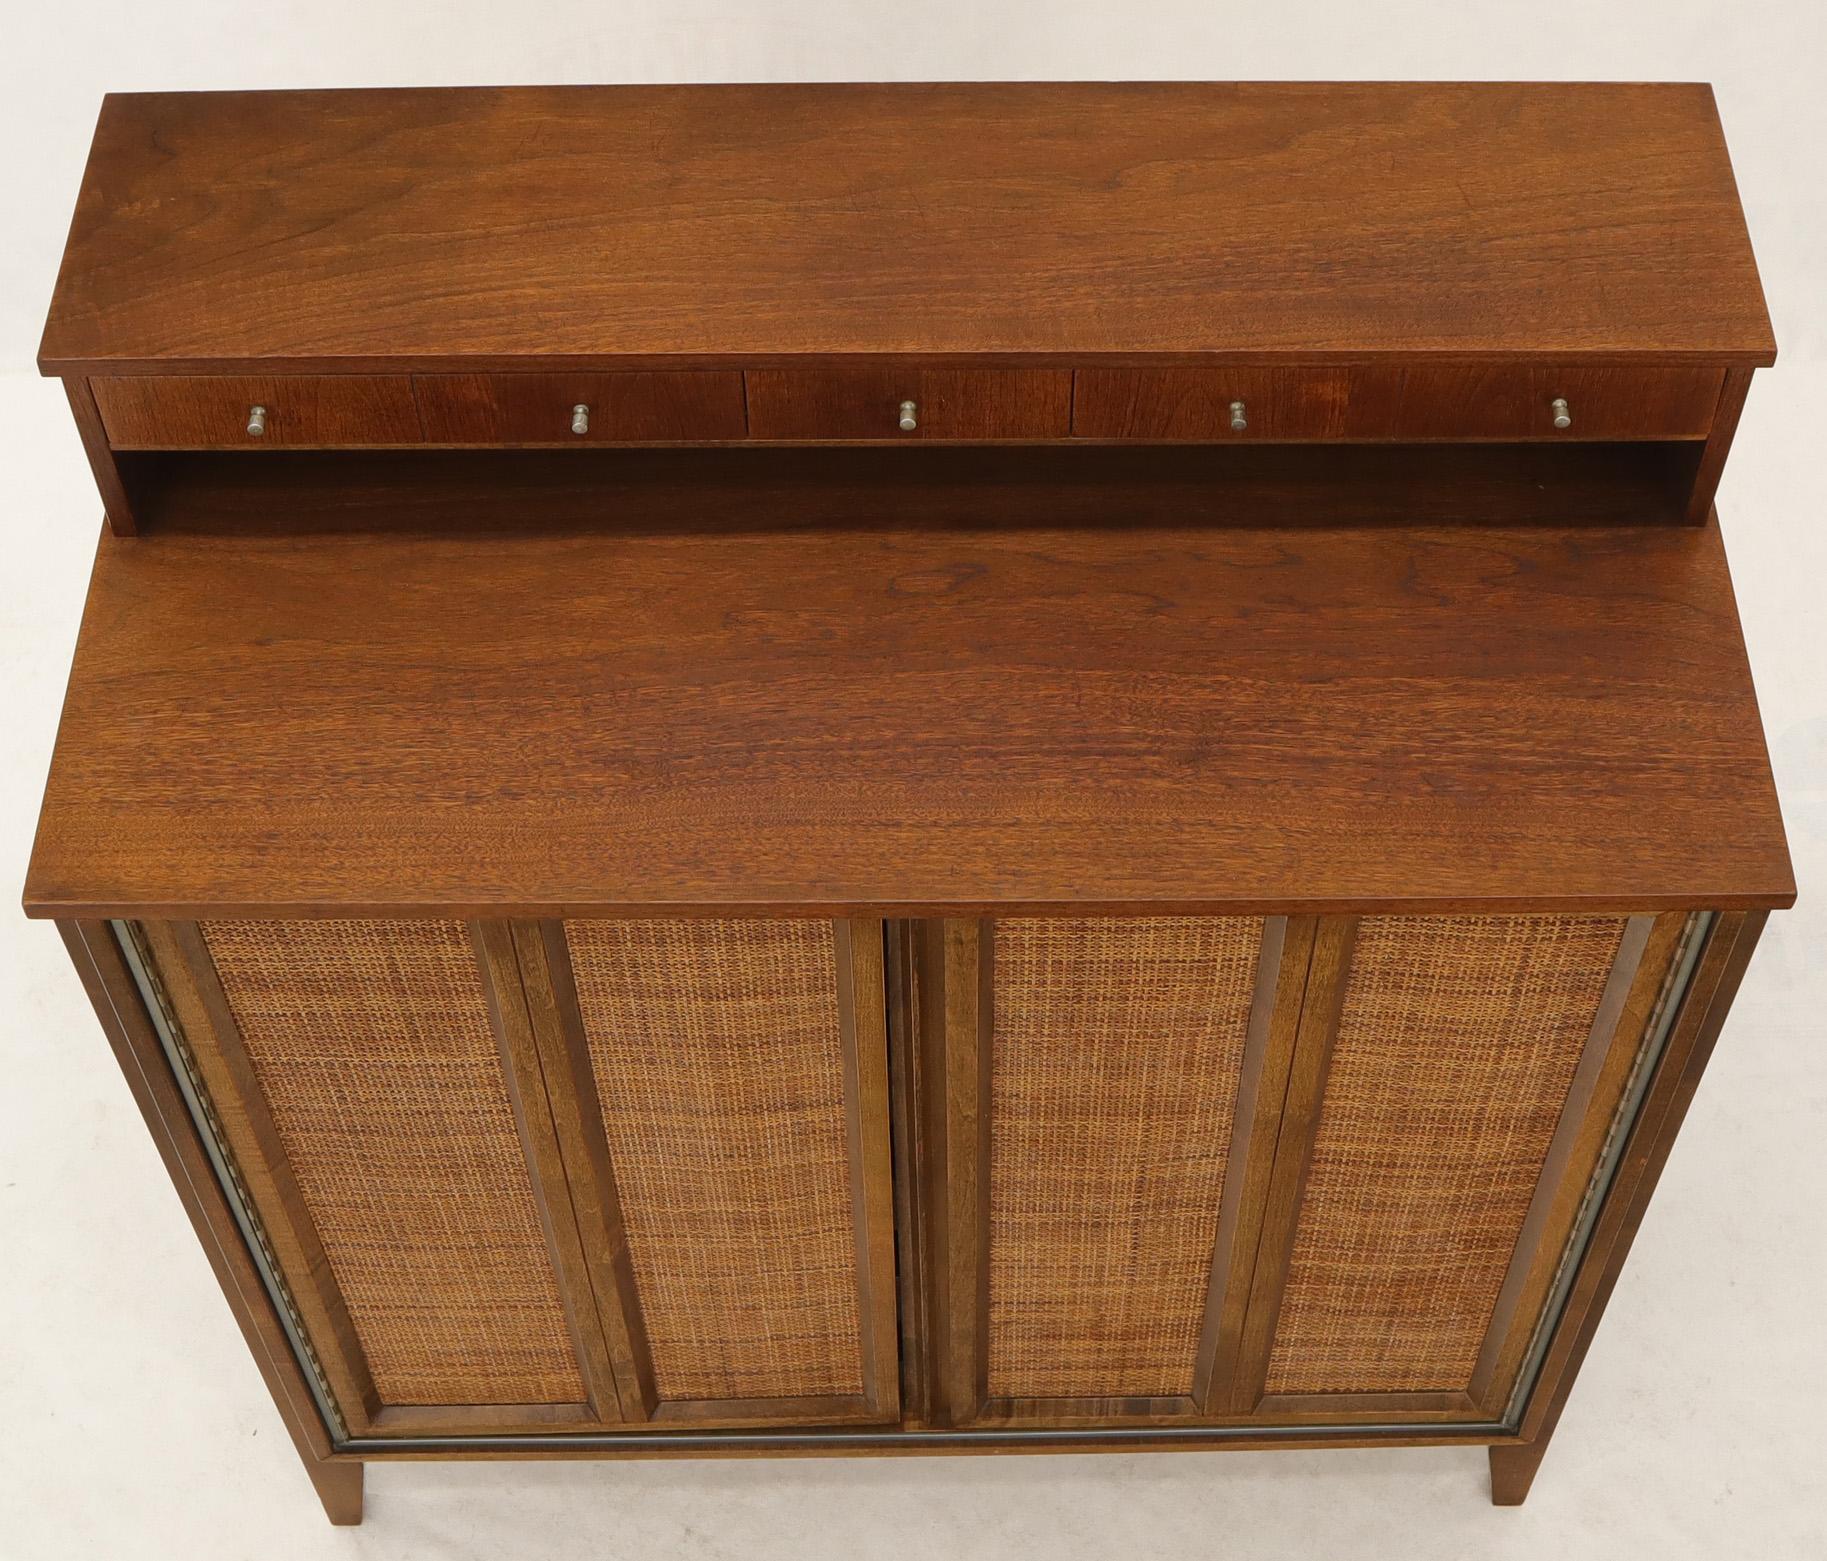 American Mid-Century Modern High Chest Dresser with Separate Jewelry Compartment on Top For Sale